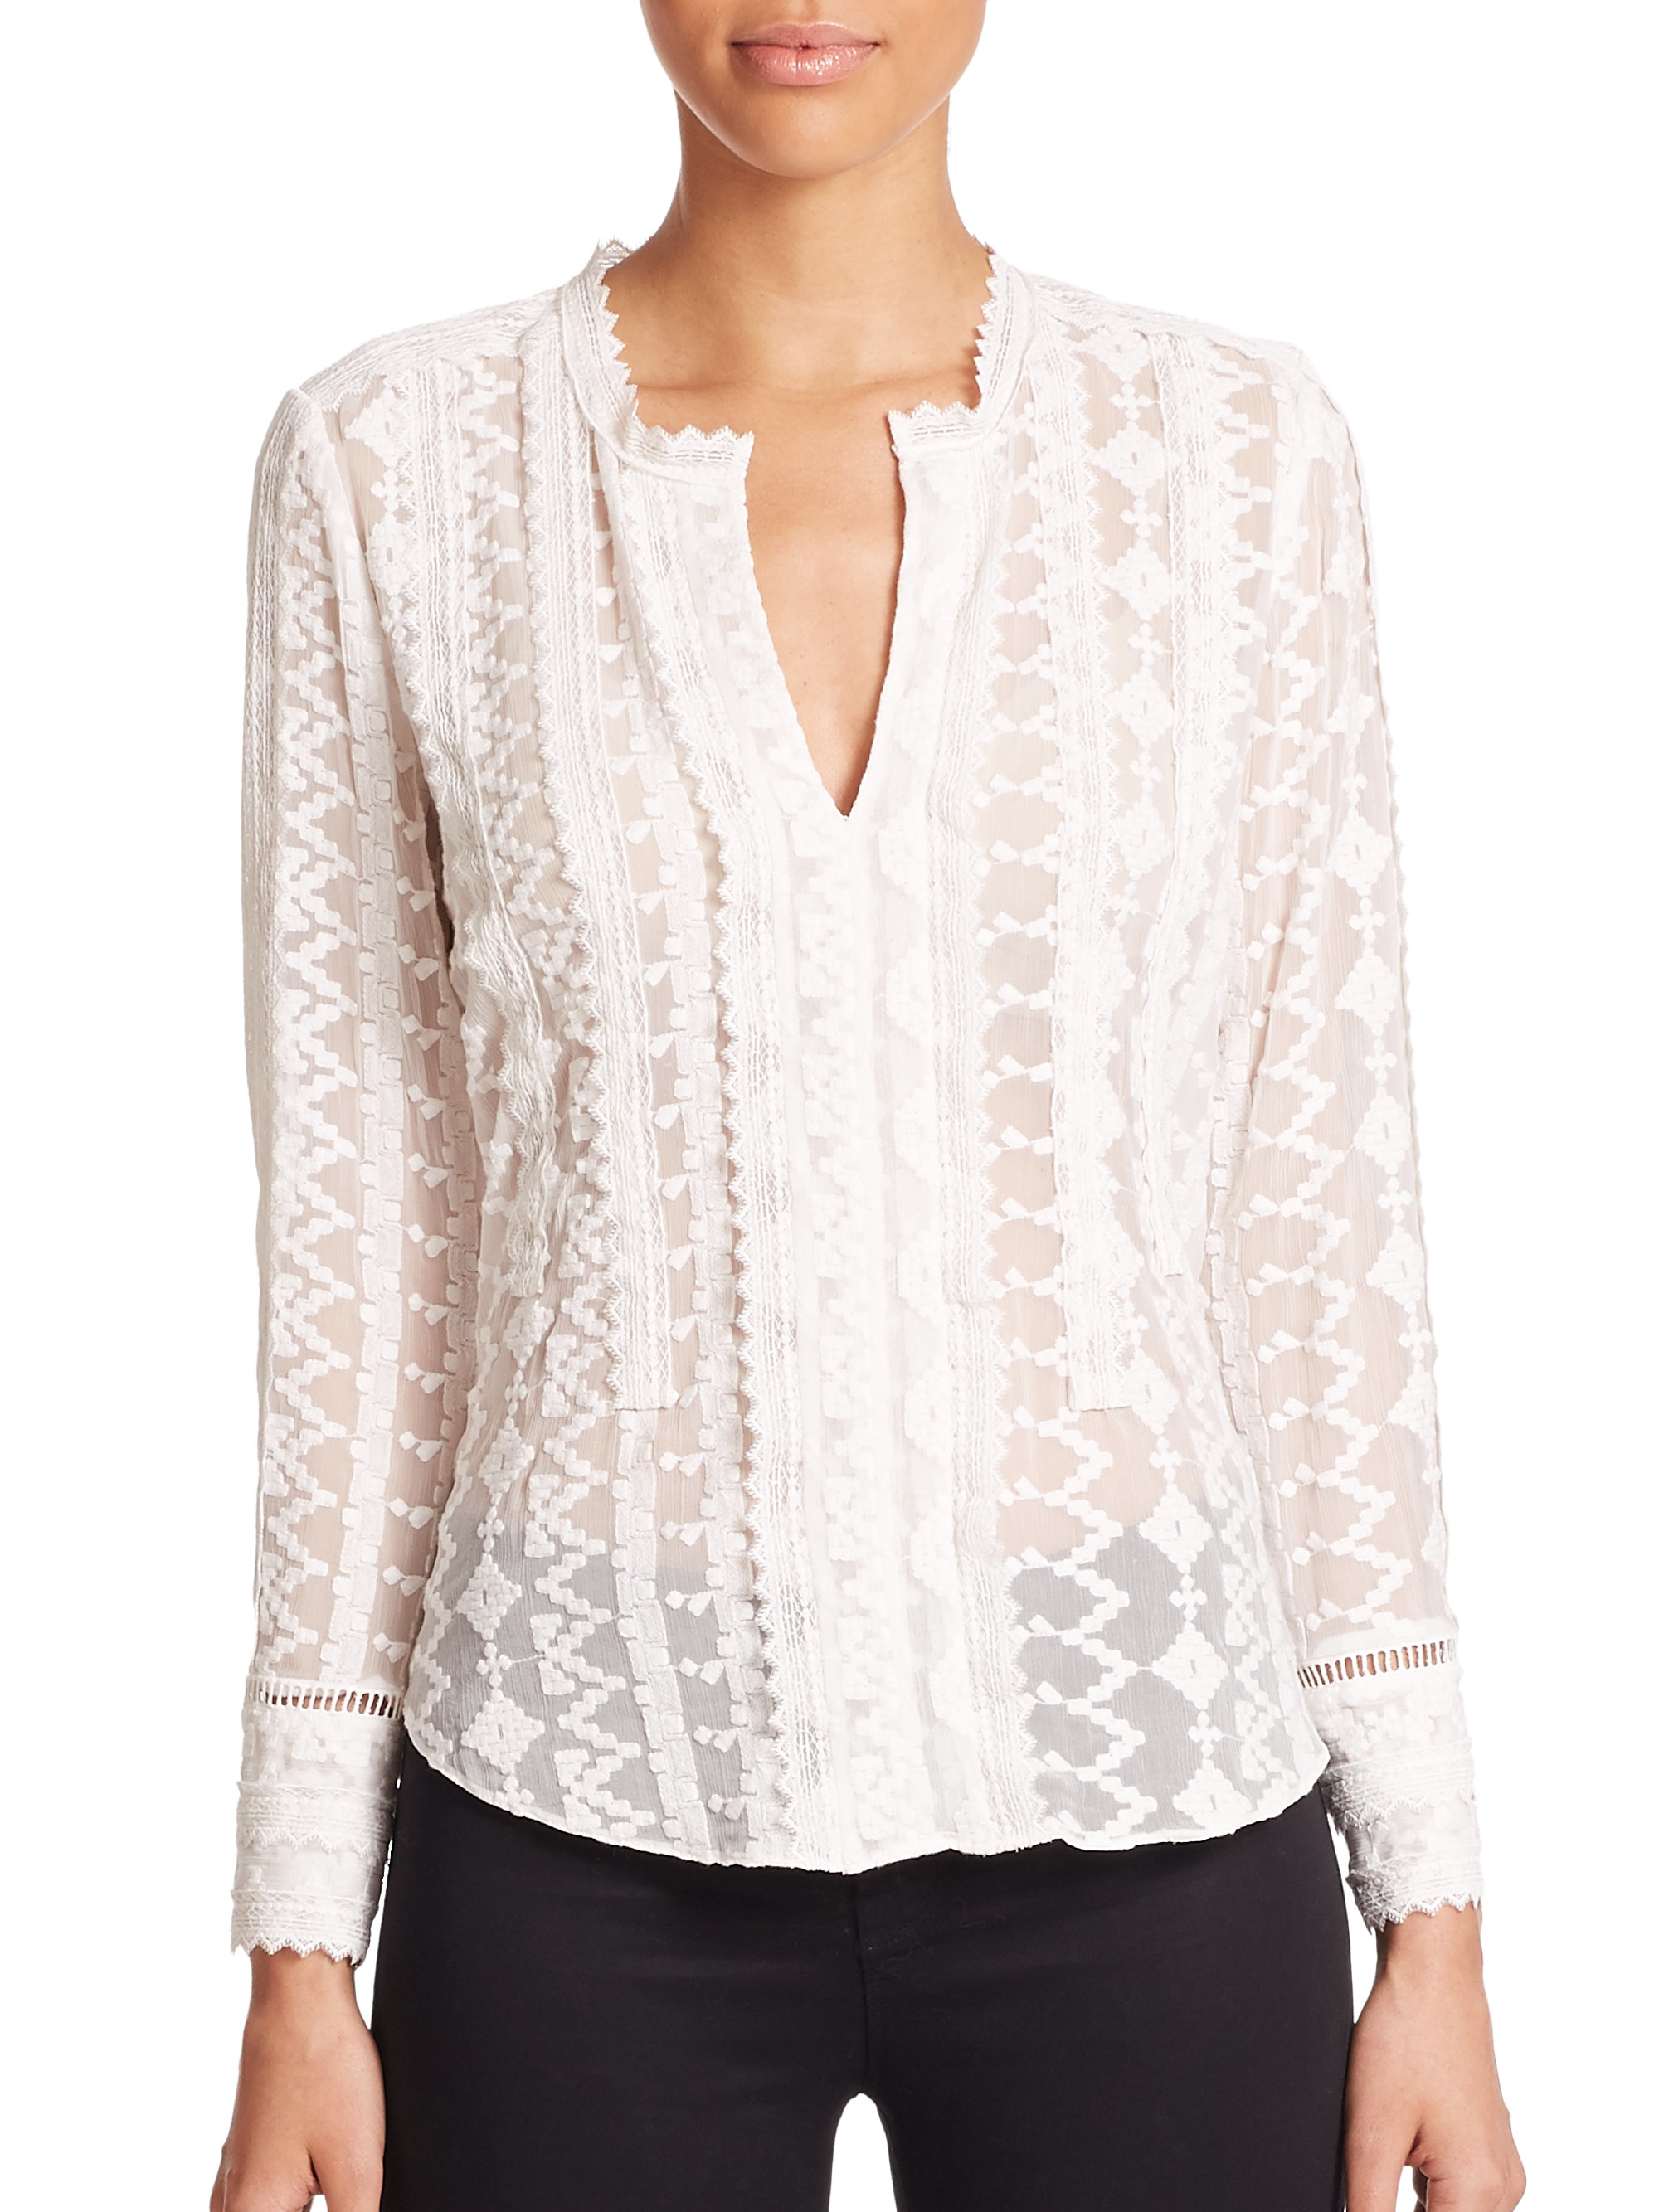 Lyst - Rebecca Taylor Embroidered Silk Chiffon Top in White